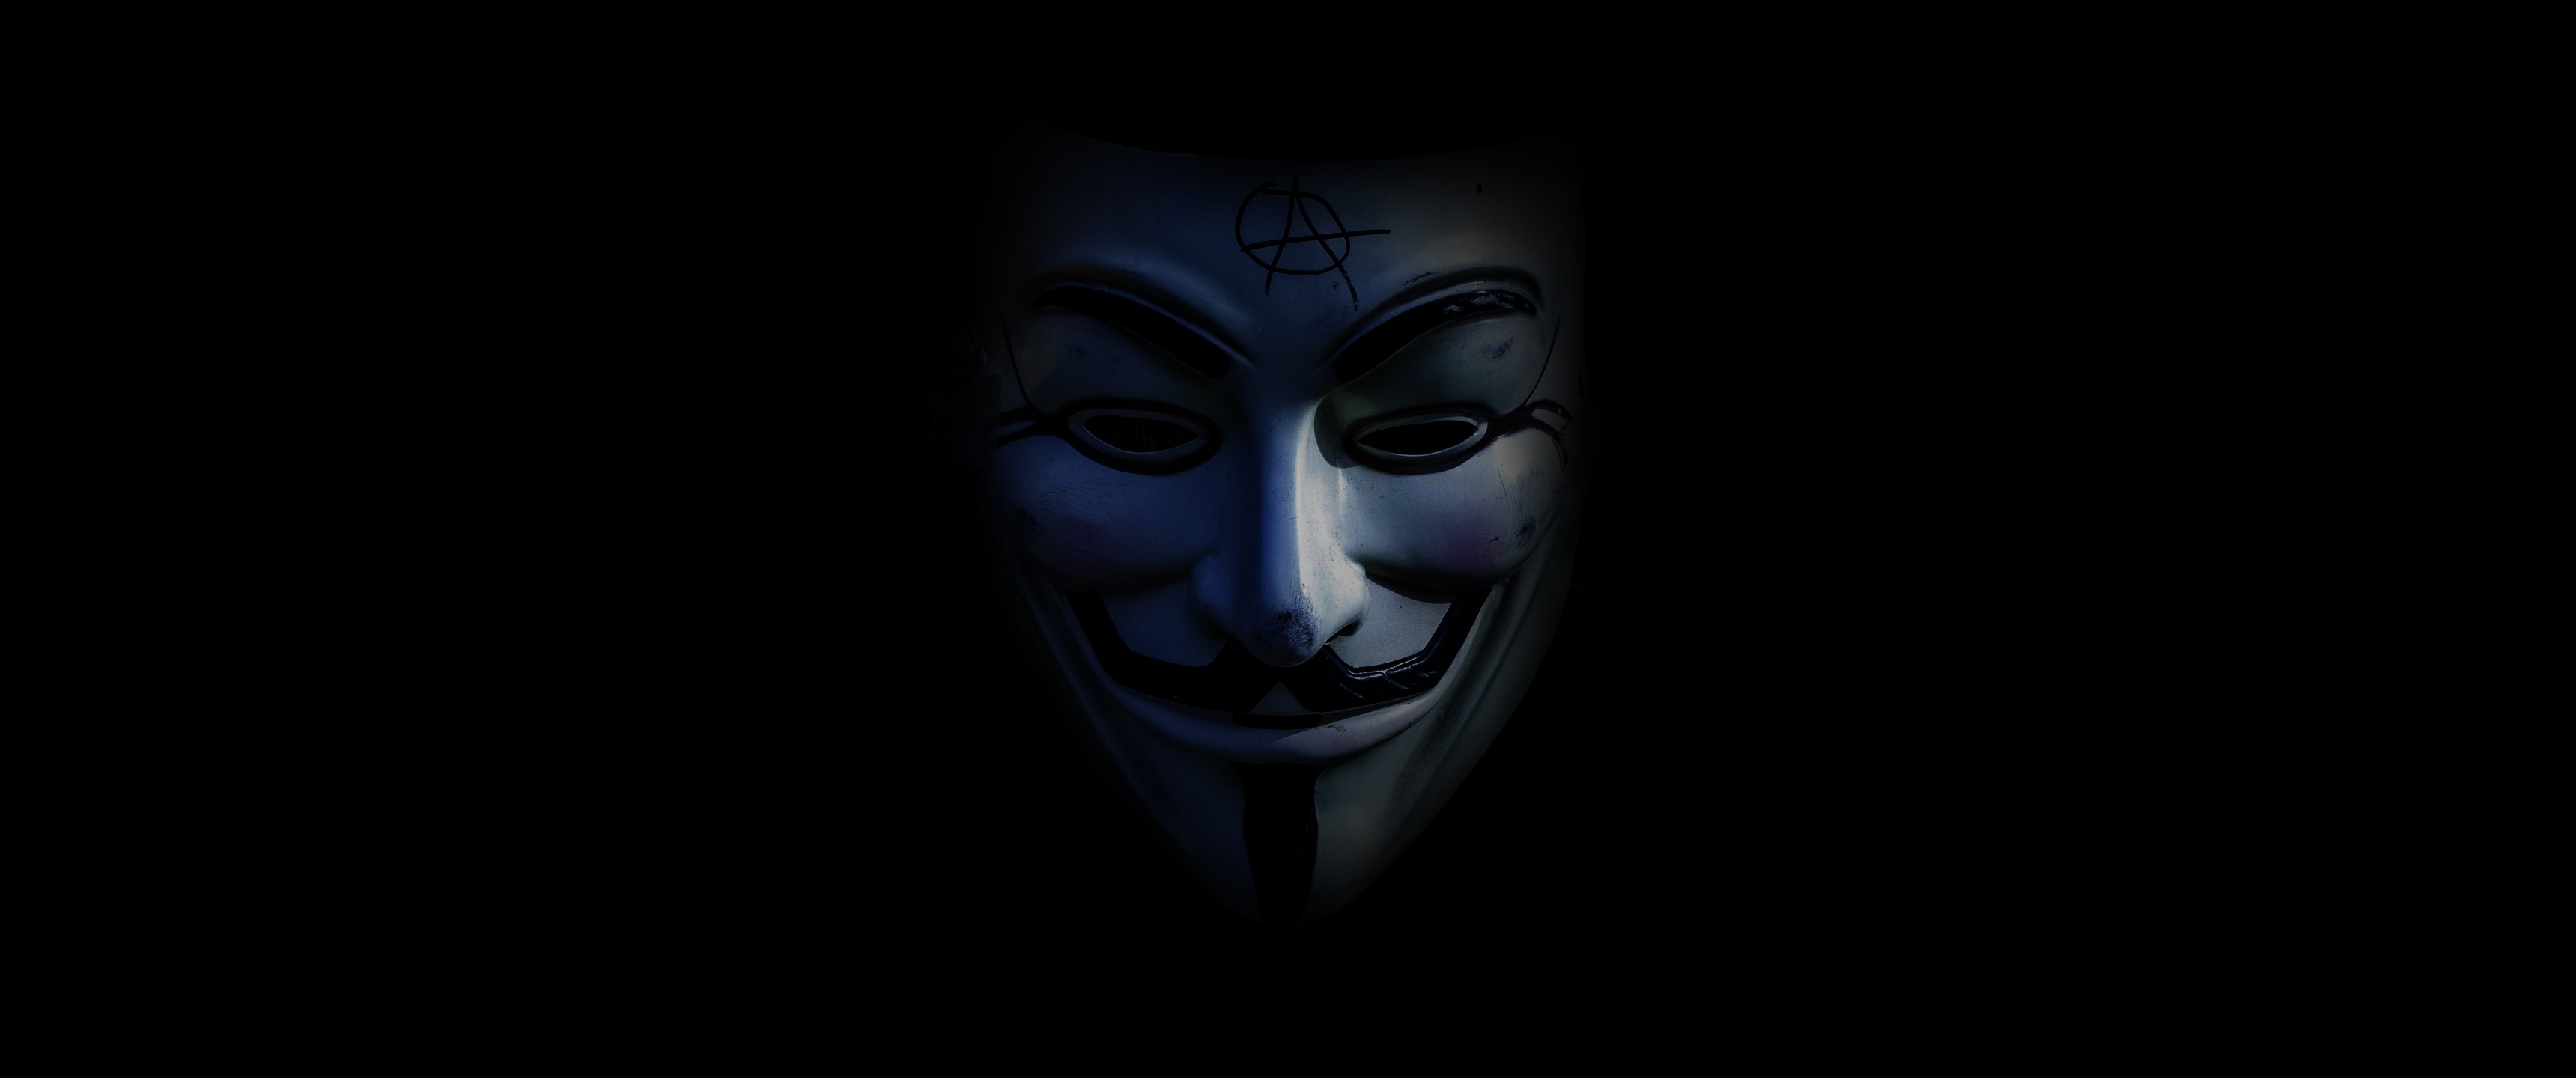 HD anonymous wallpapers  Peakpx